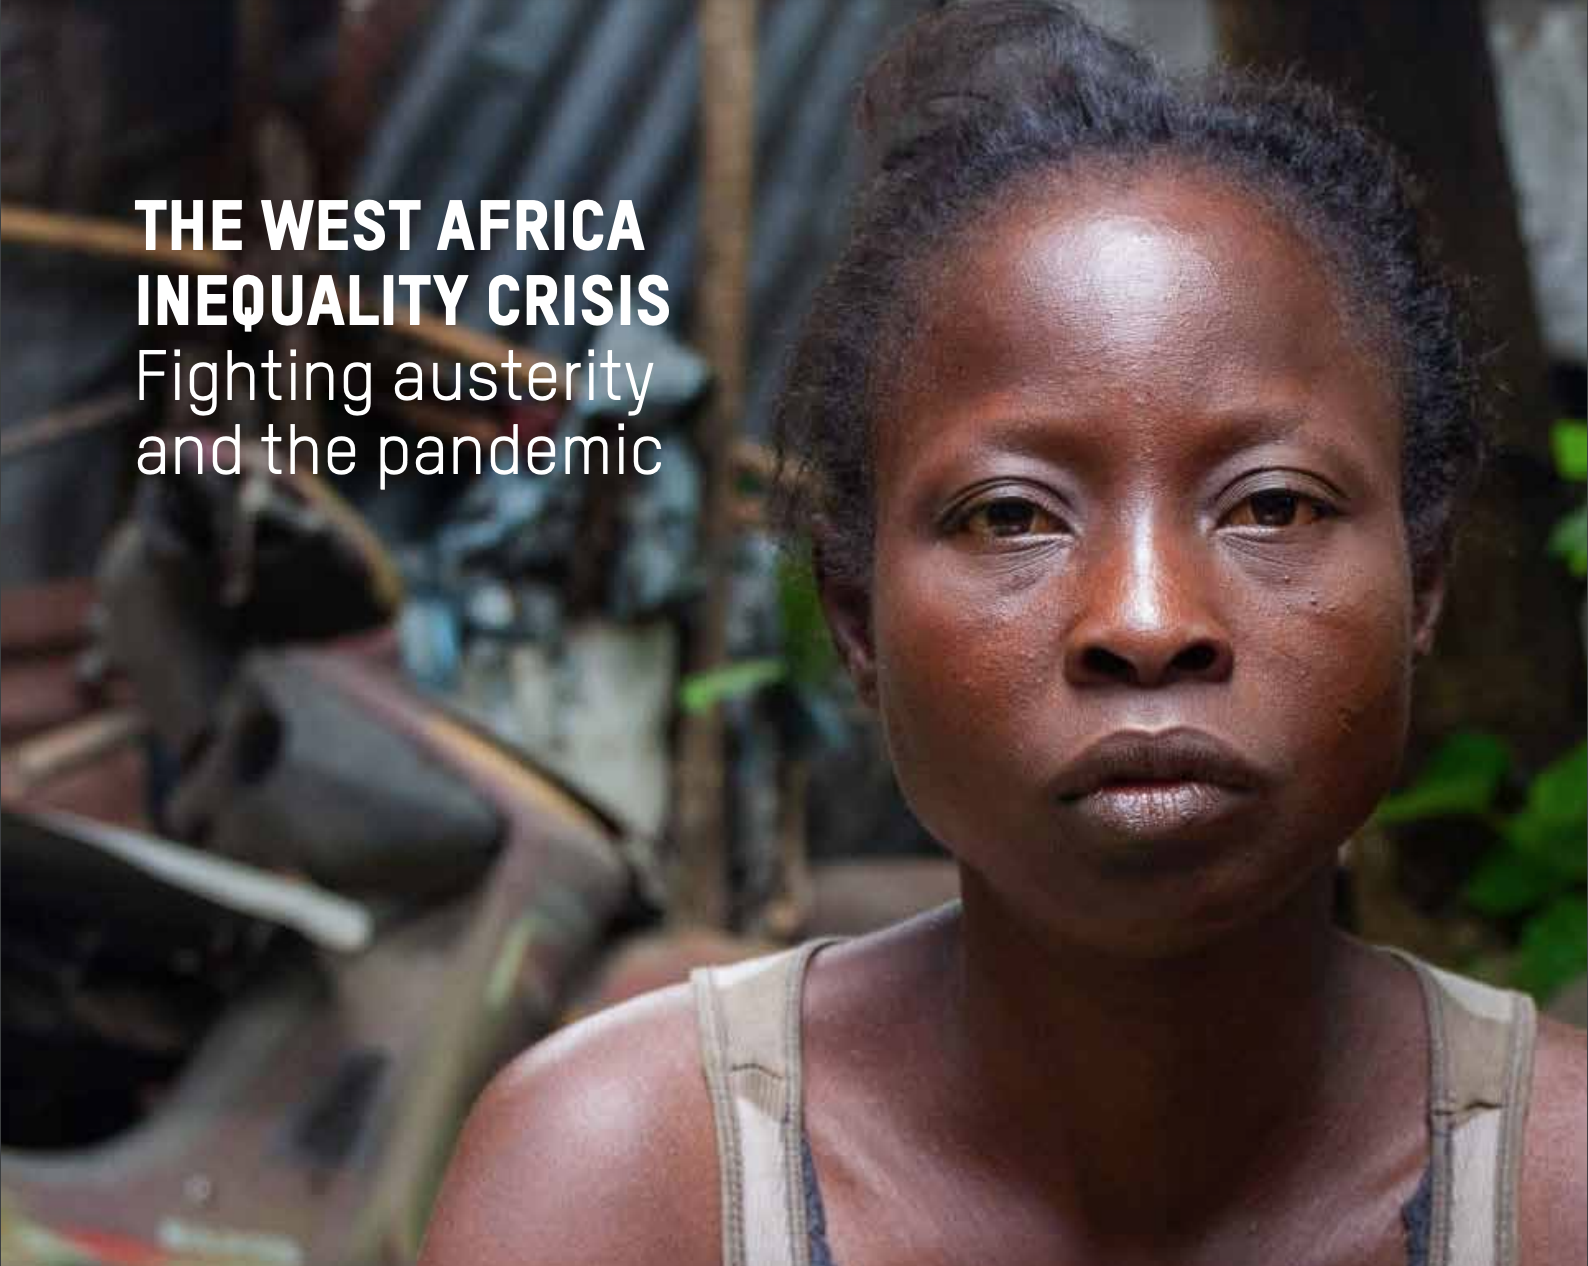 The West Africa inequality crisis: fighting austerity and the pandemic - Oxfam International